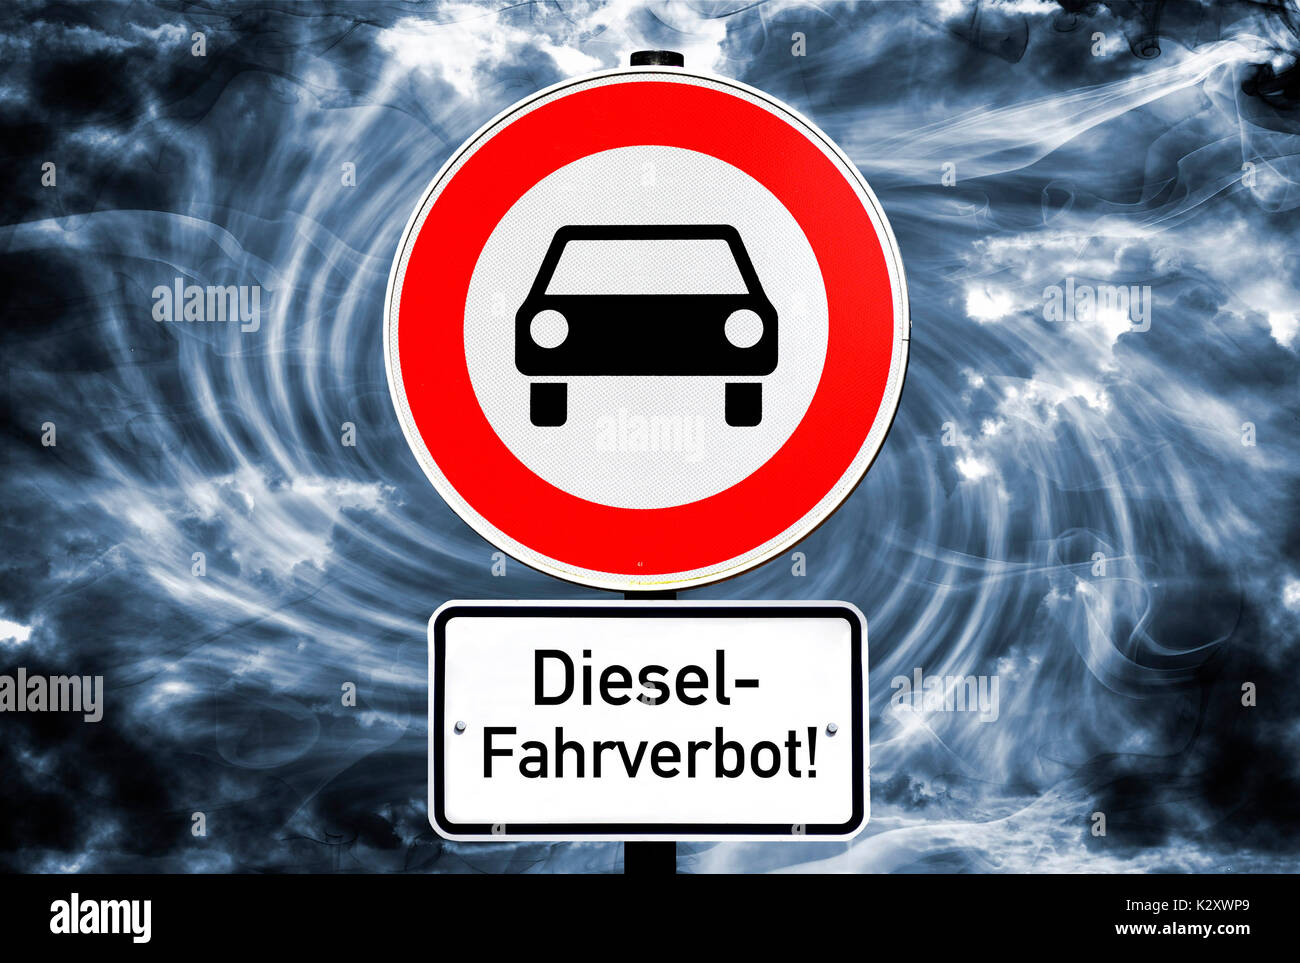 Sign Ban on driving for vehicle, diesel ban on driving, Schild Fahrverbot fuer Kfz, Diesel-Fahrverbot Stock Photo